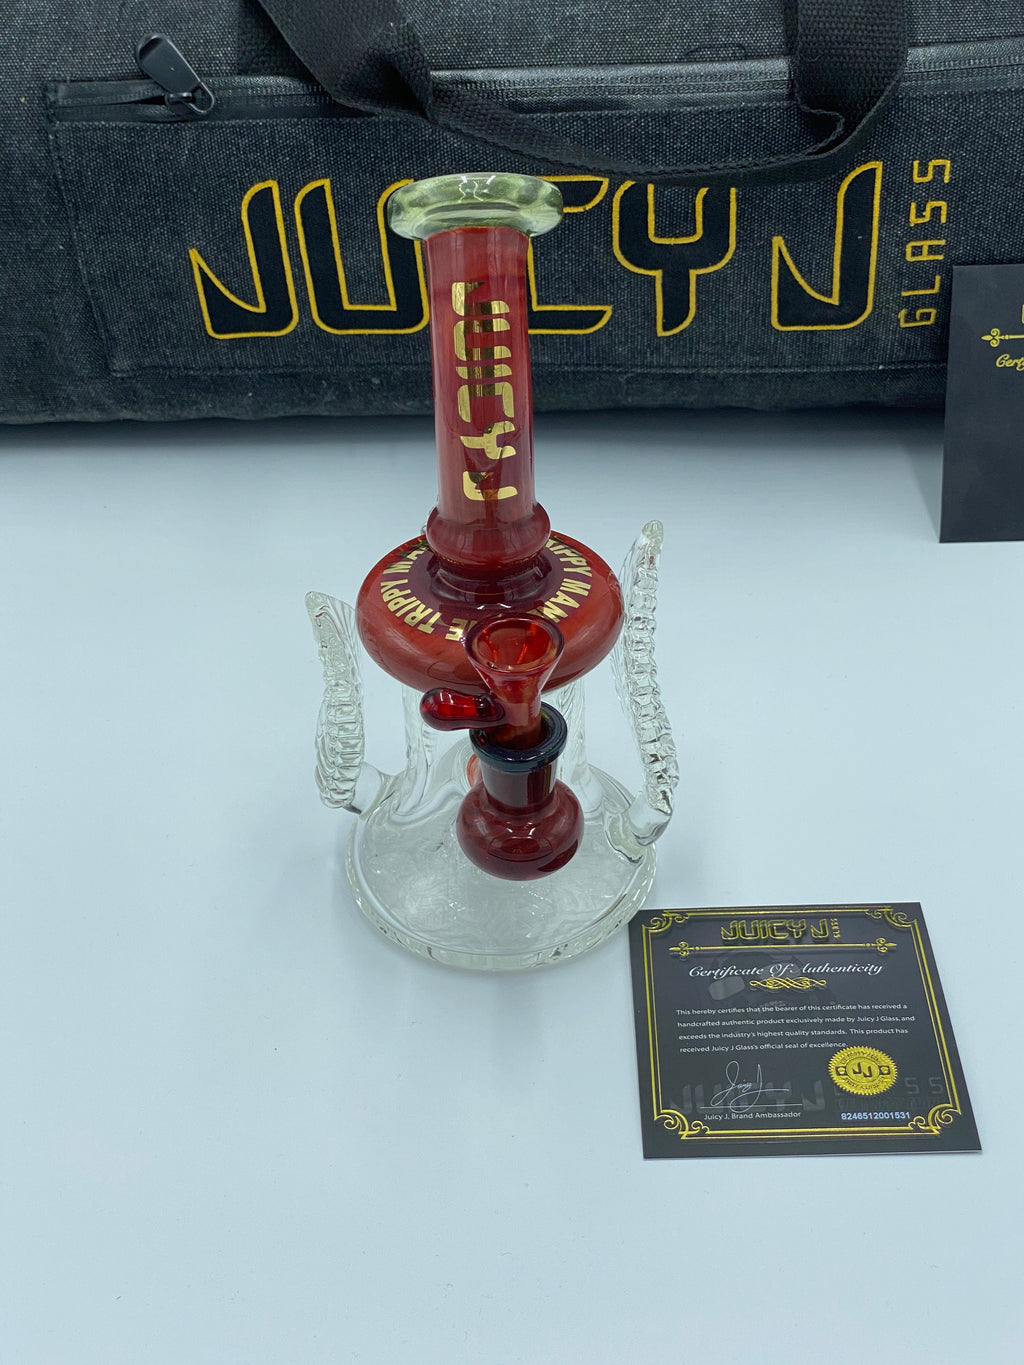 JUICY JAY LEAF RIG - Smoke Country - Land of the artistic glass blown bongs